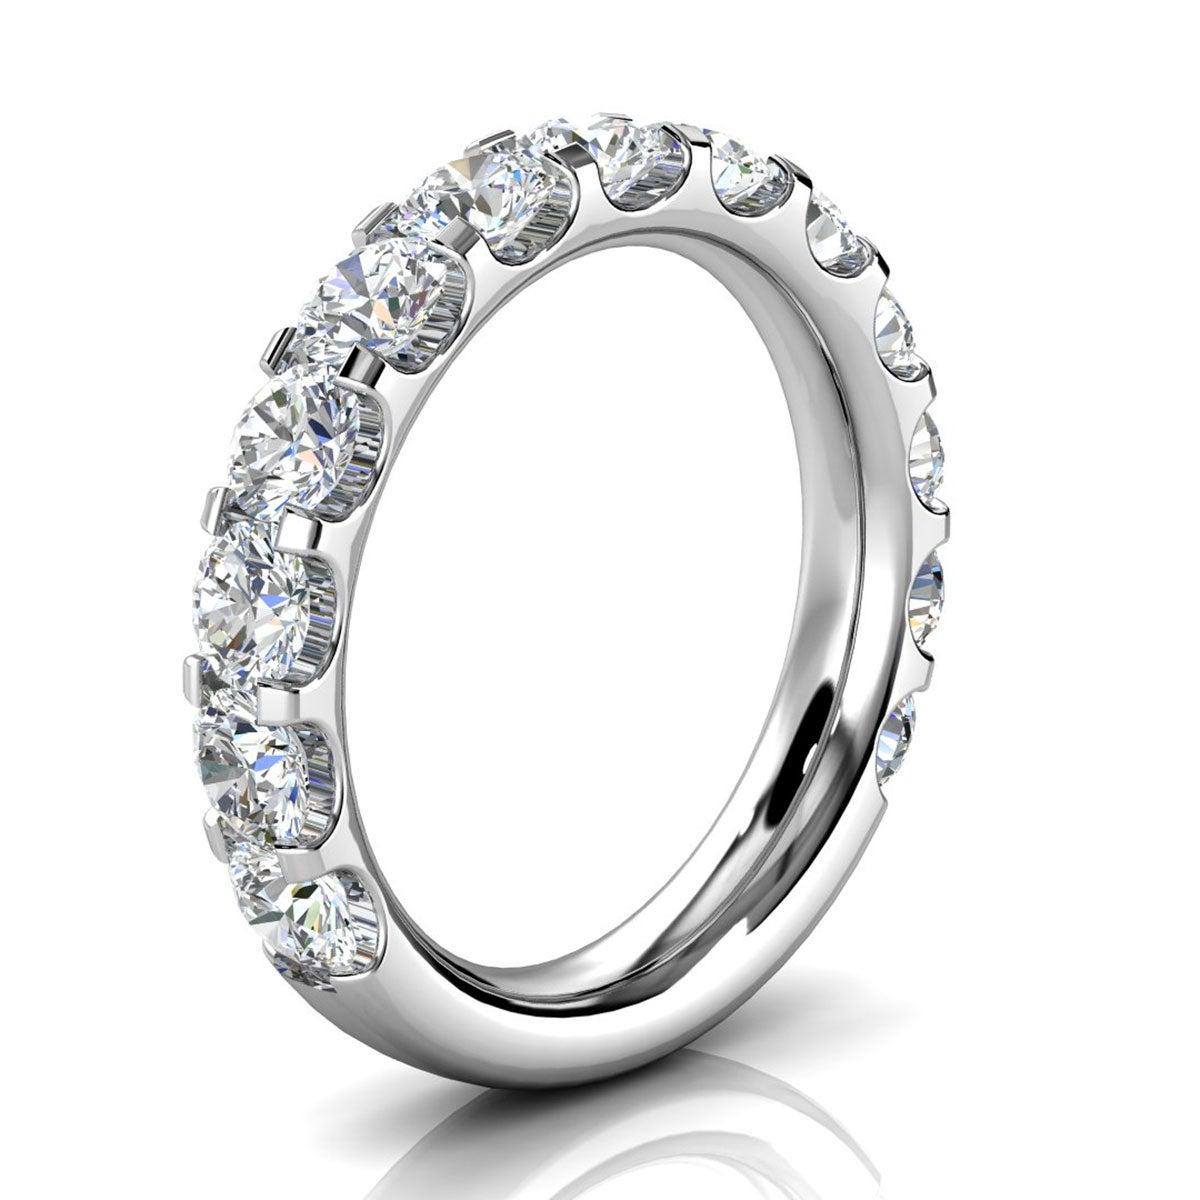 For Sale:  Platinum Micro-Prong Diamond Ring '2 Ct. tw' 2